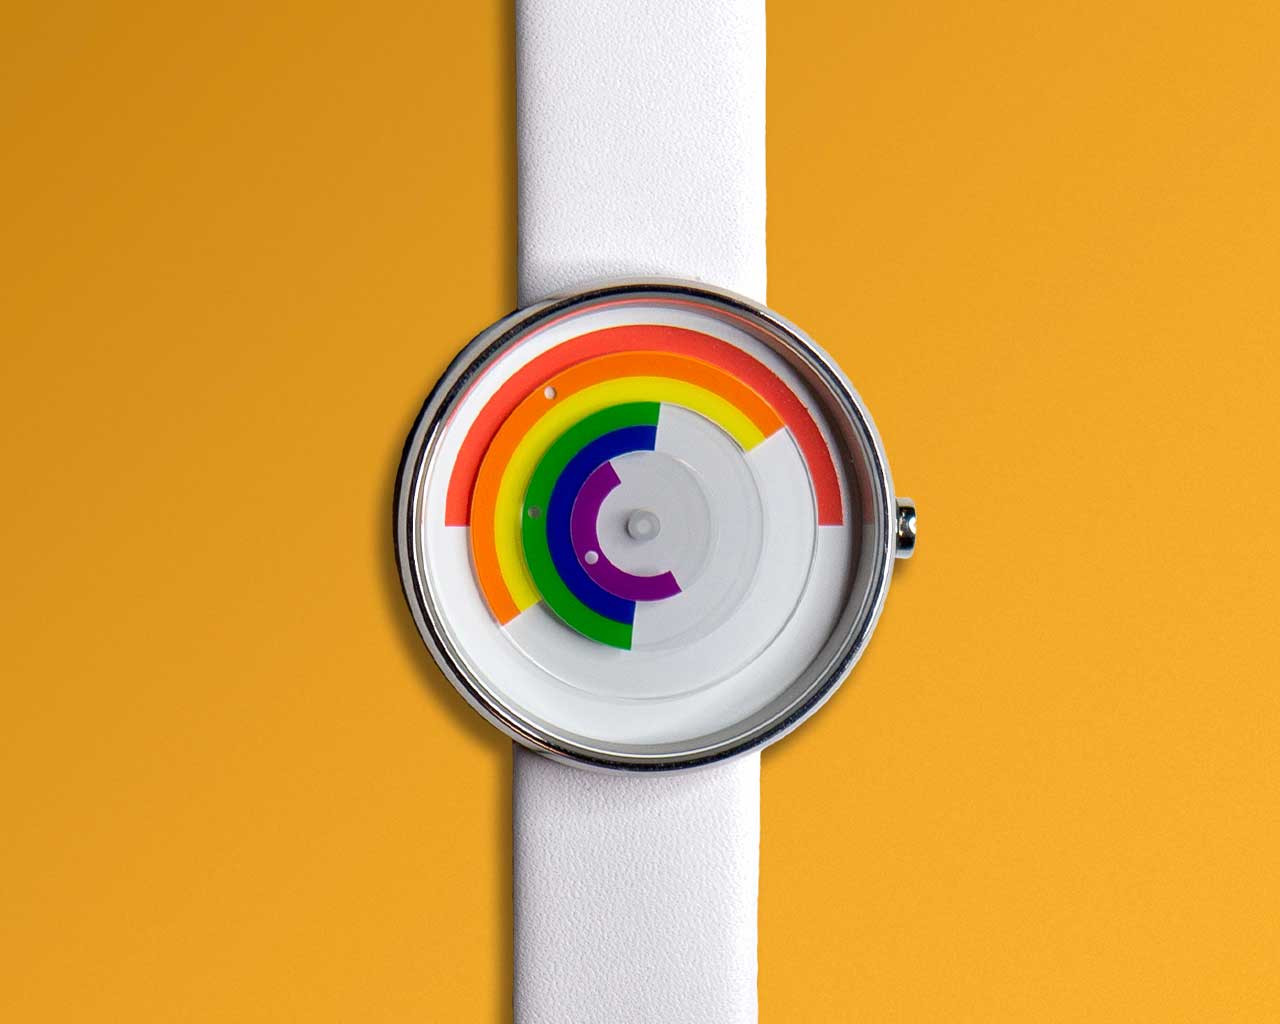 Projects Watches Celebrates Pride With the New Pride Prism Watch